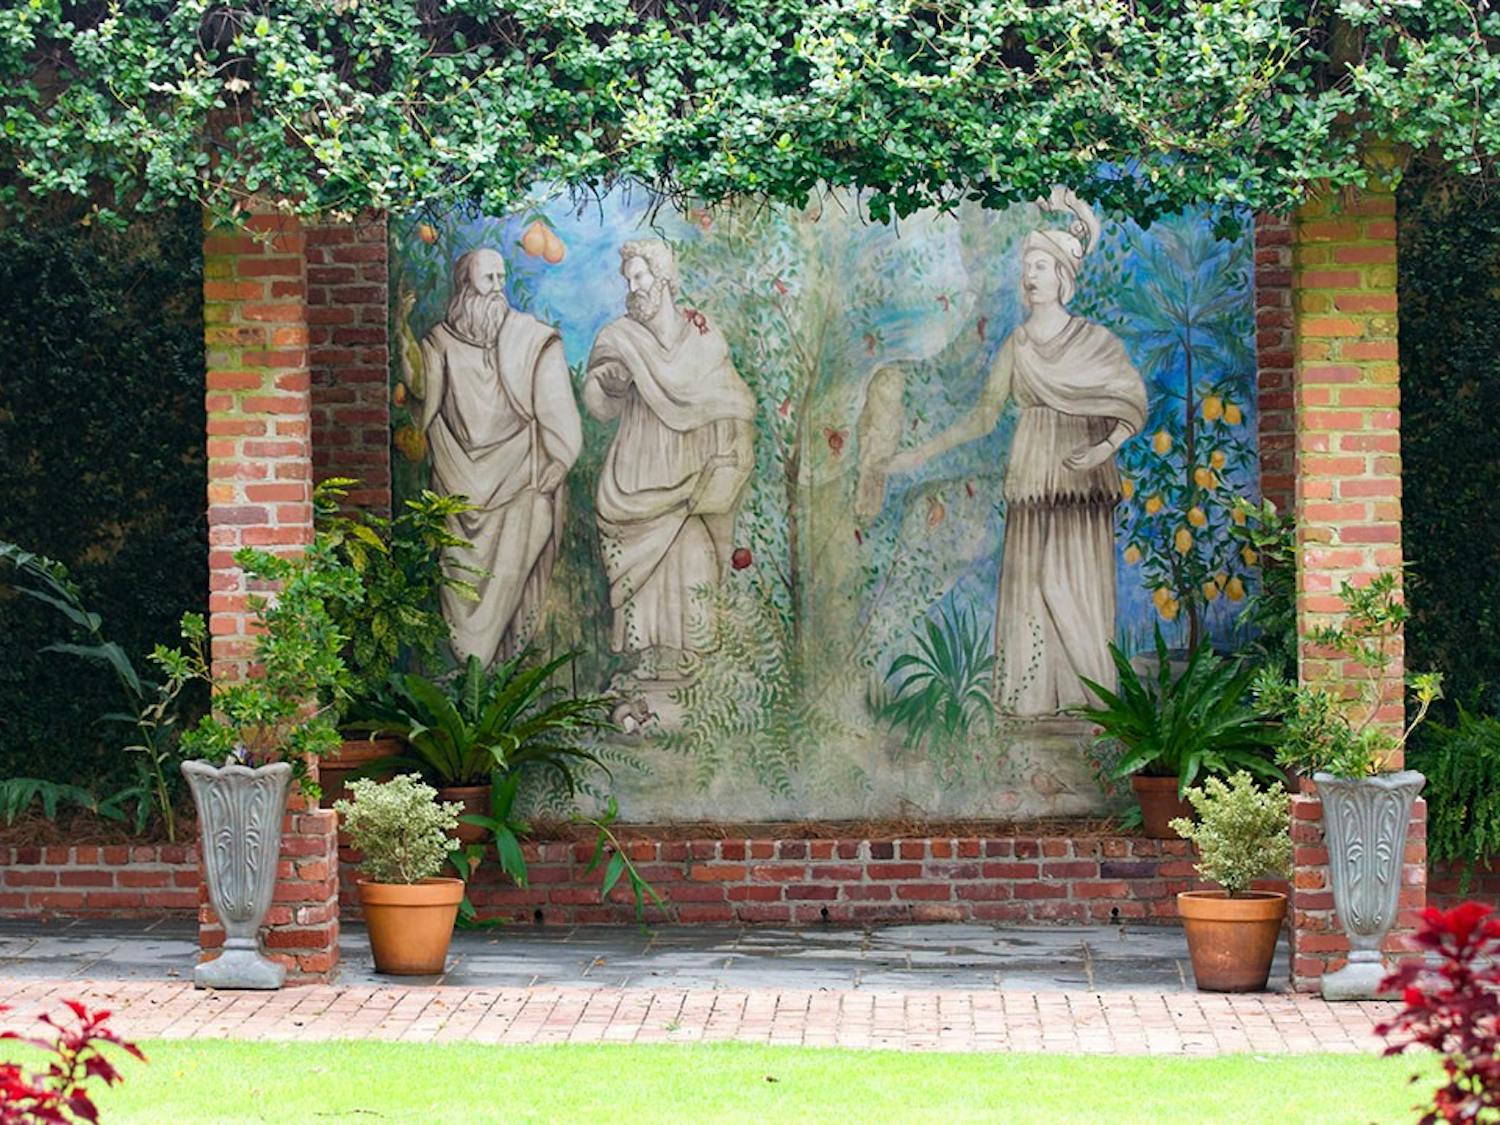 "A Present Past" is an Italian fresco by USC alumna Taylor Tynes. It features Minerva, Aristotle, Plato and some characteristics personal to USC such as the pomegranate tree, the seal, a squirrel and more to pay homage to the history of this institution.